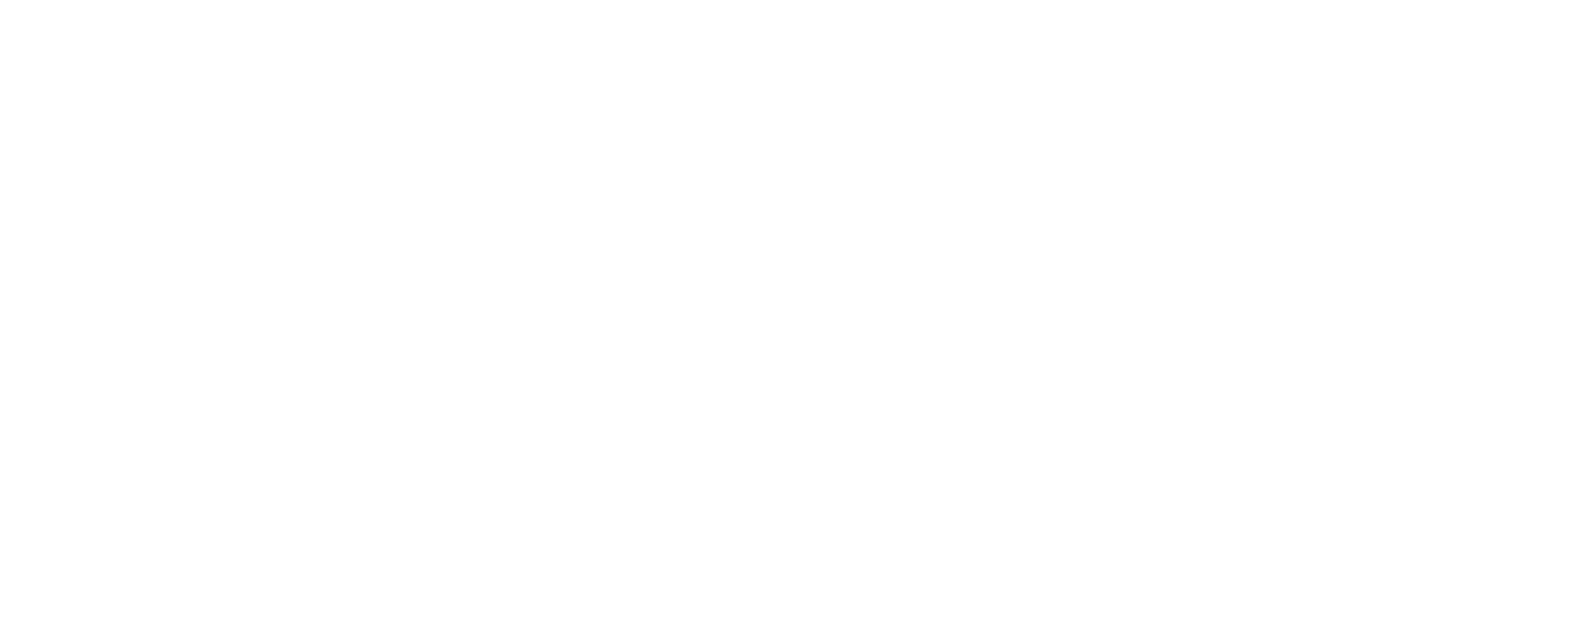 International Manufacturing & Assembly